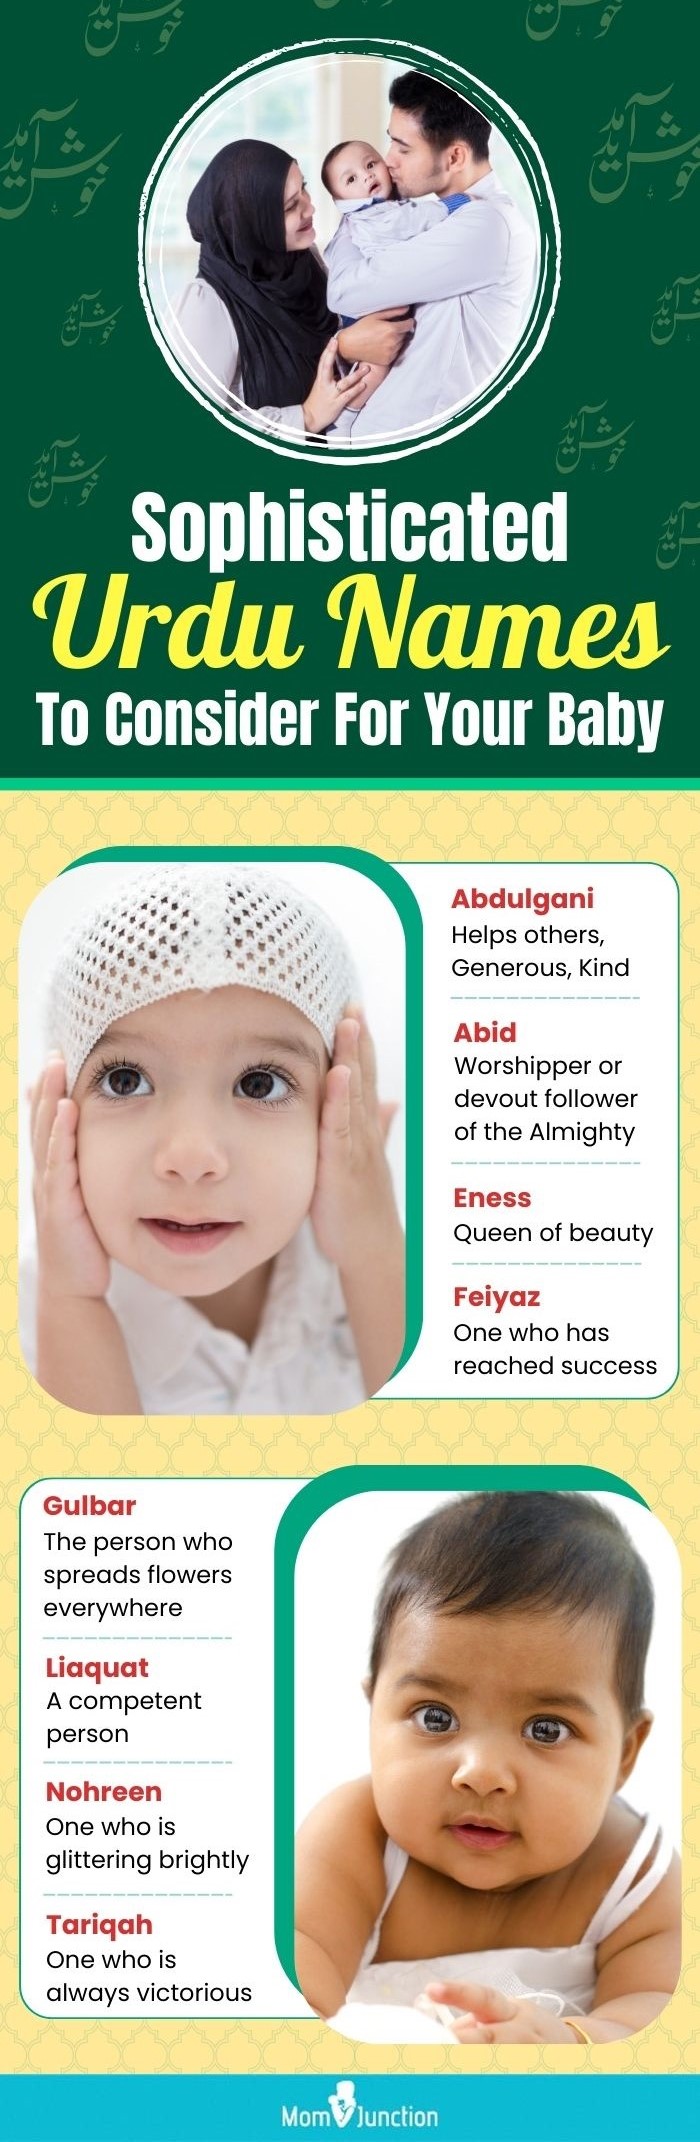 sophisticated urdu names to consider for your baby (infographic)